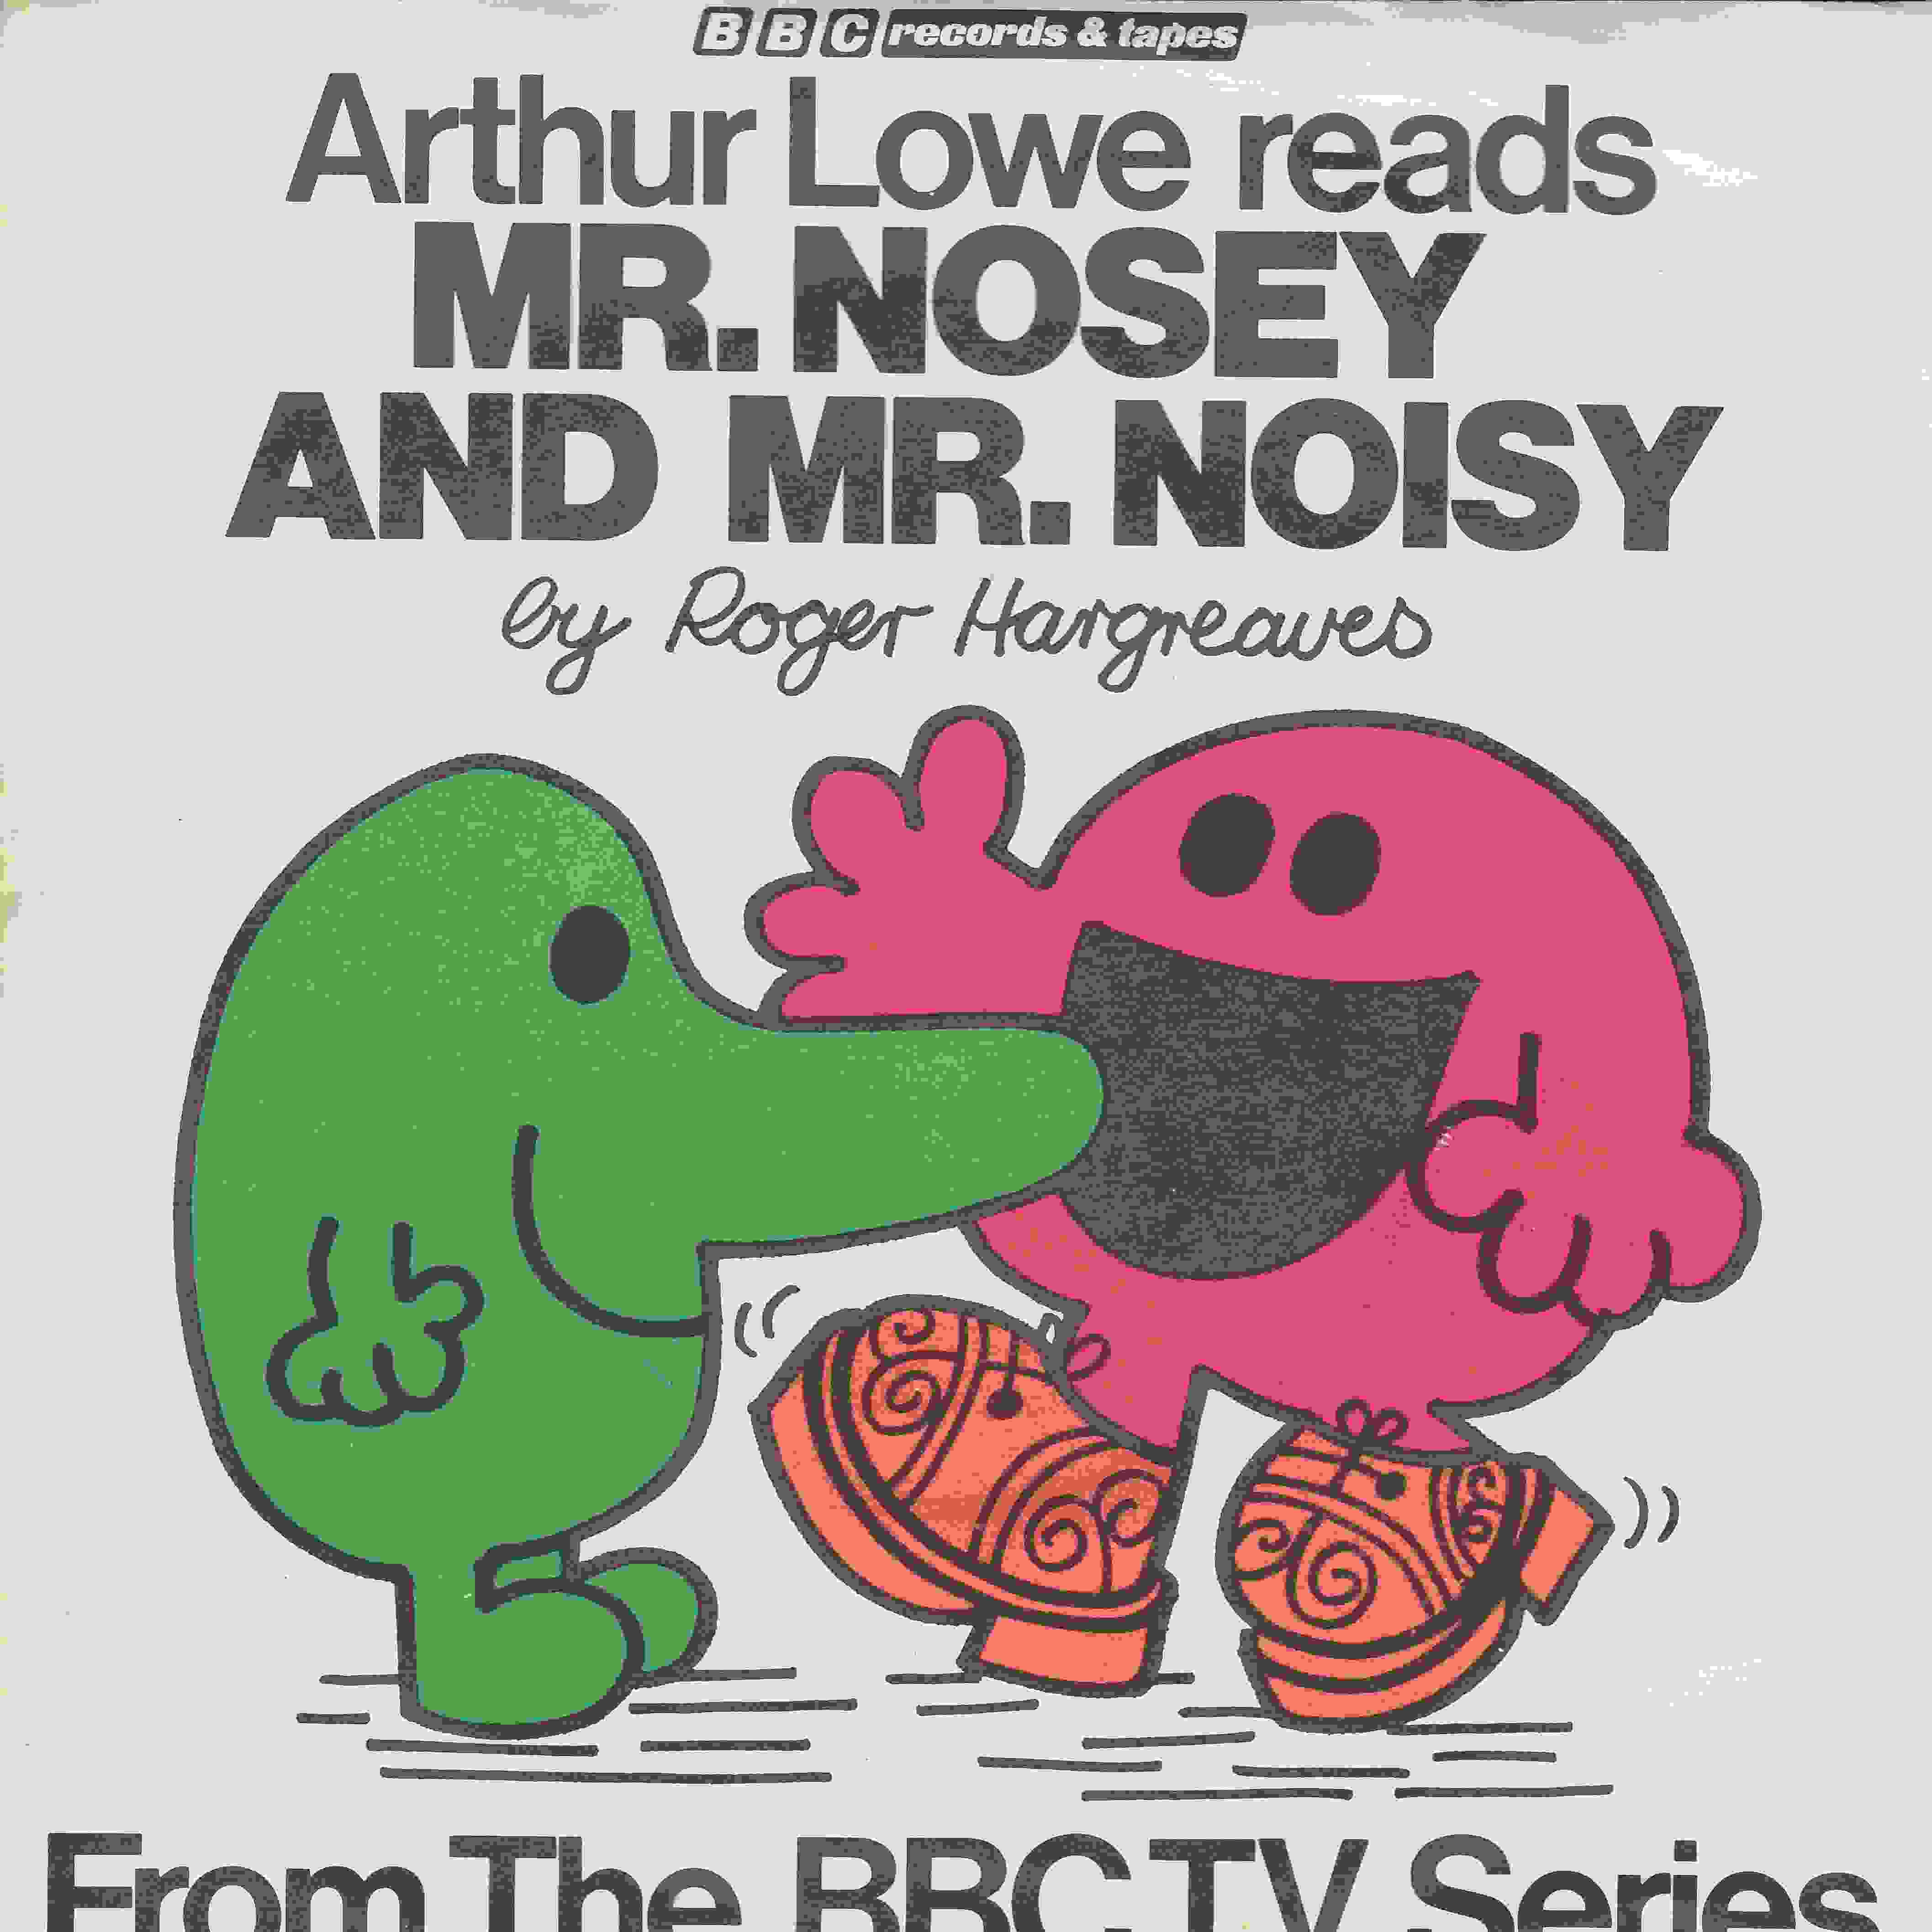 Picture of RESL 39 Mr Men - Mr Nosey by artist Roger Hargreaves from the BBC records and Tapes library